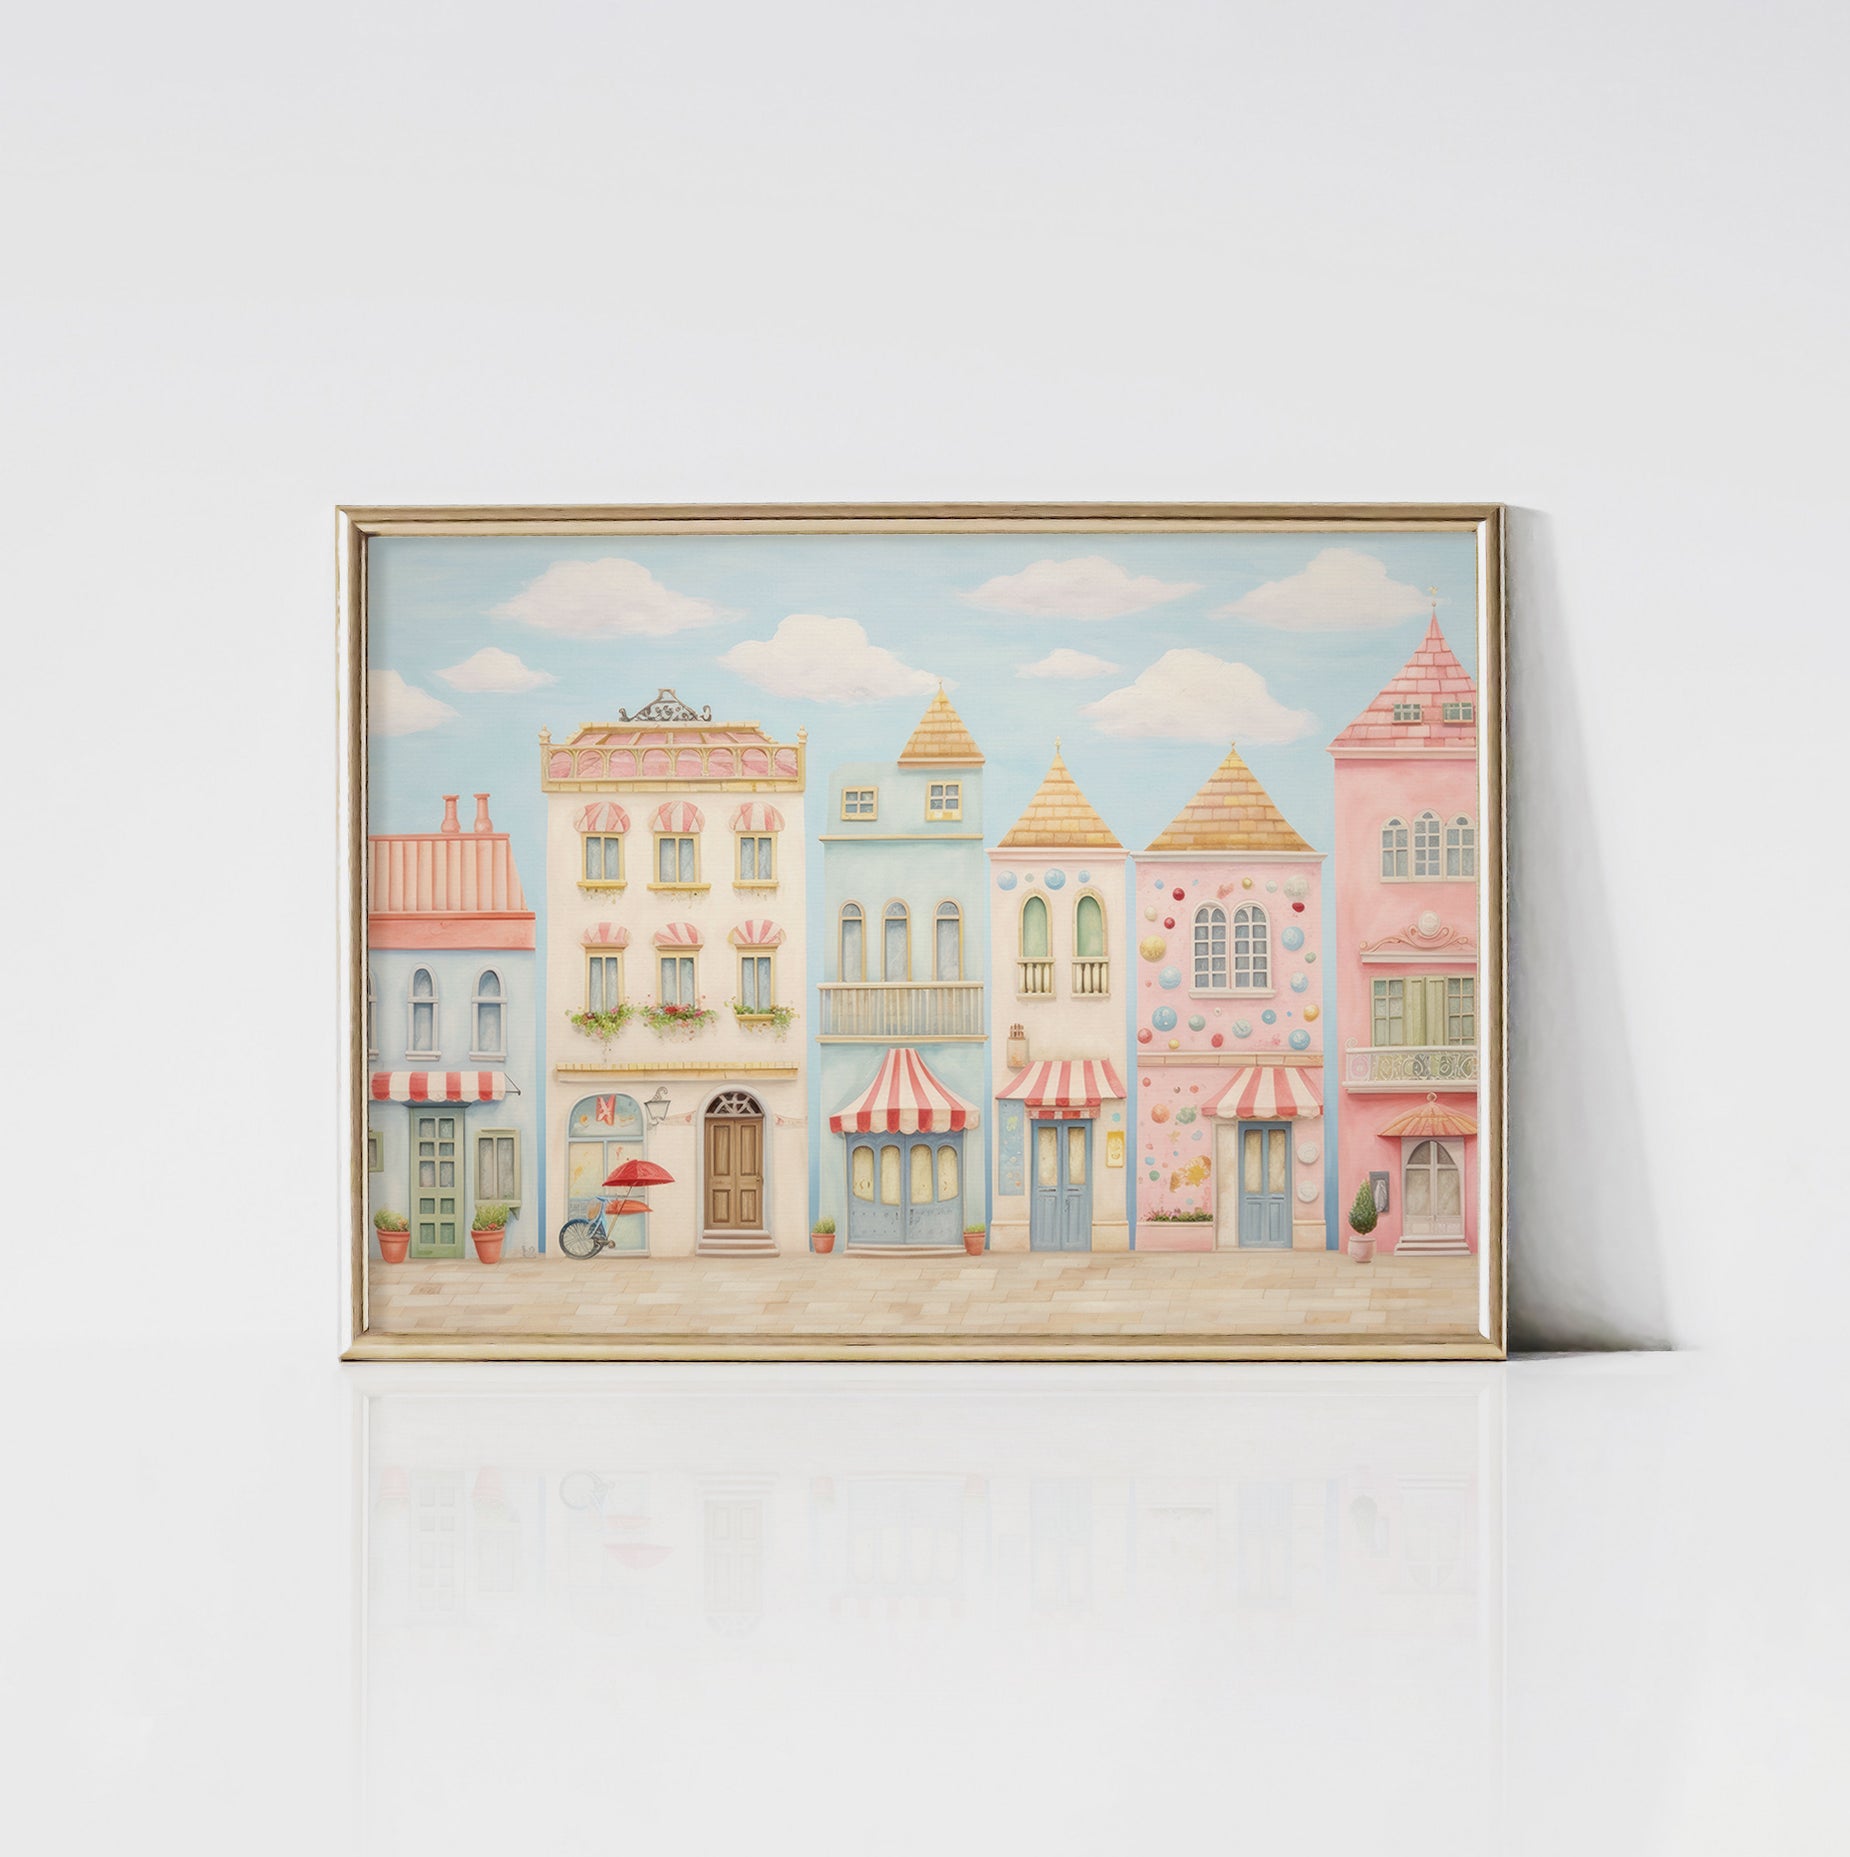 An art print of whimsical pastel-colored townhouses framed in gold. The buildings display different architectural styles, complete with awnings, balconies, and decorative elements, set against a clear blue sky with fluffy white clouds.